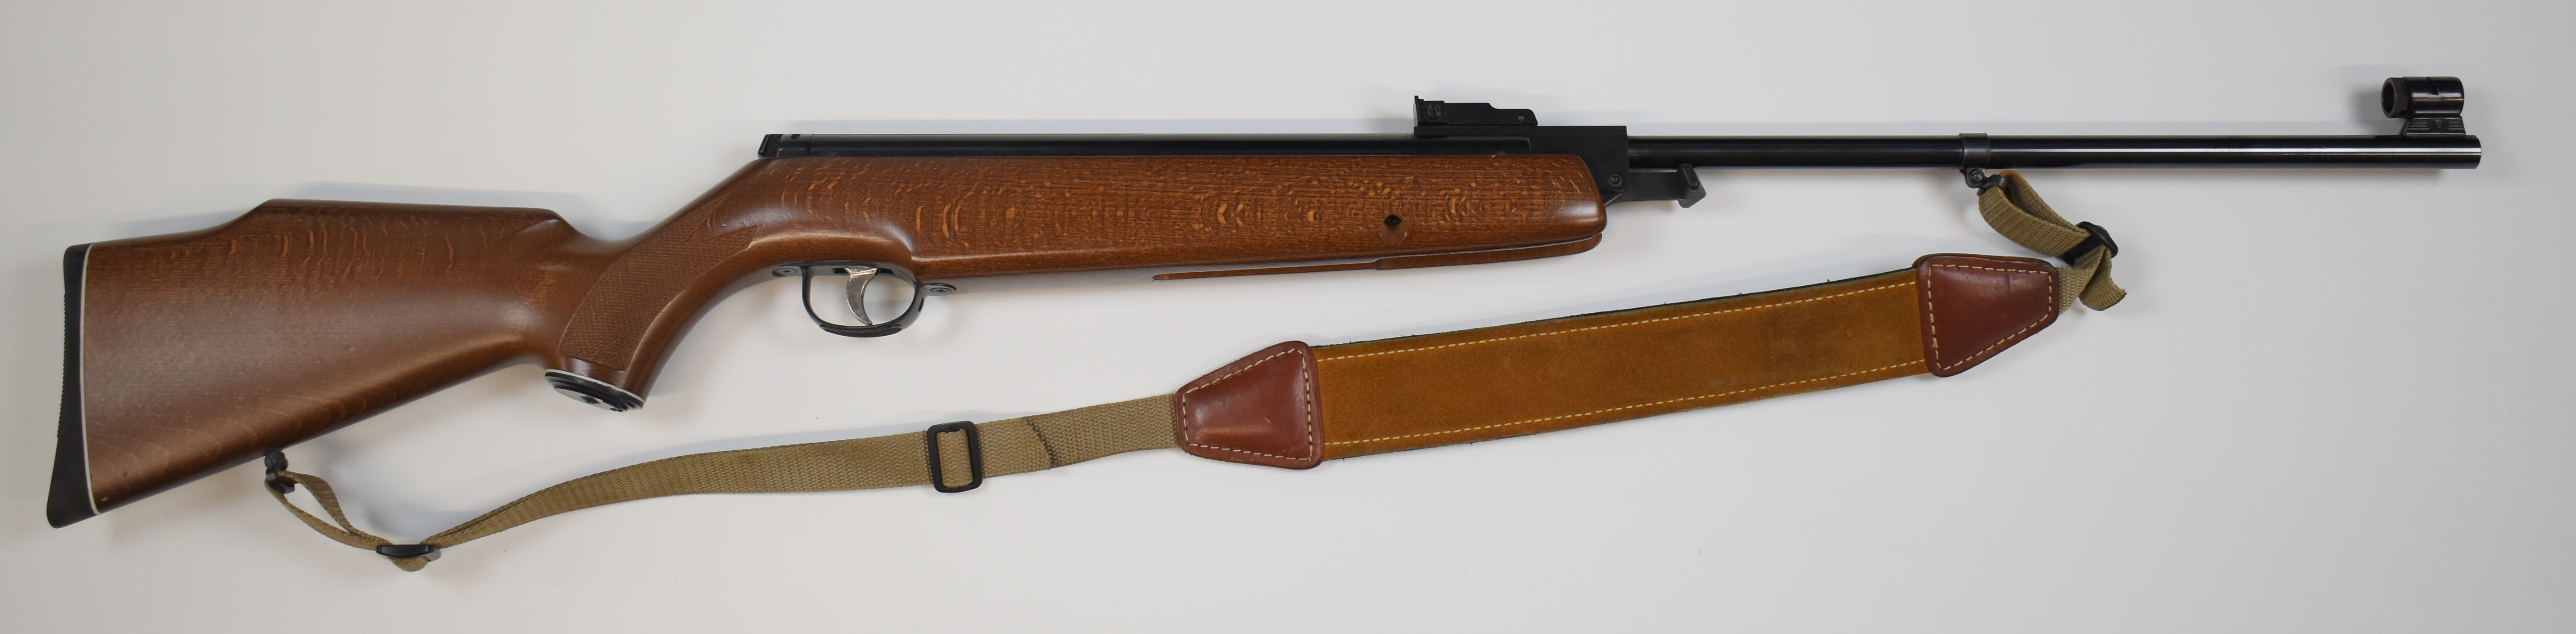 Webley Omega .177 air rifle with chequered semi-pistol grip, raised cheek piece, padded canvas and - Image 2 of 12